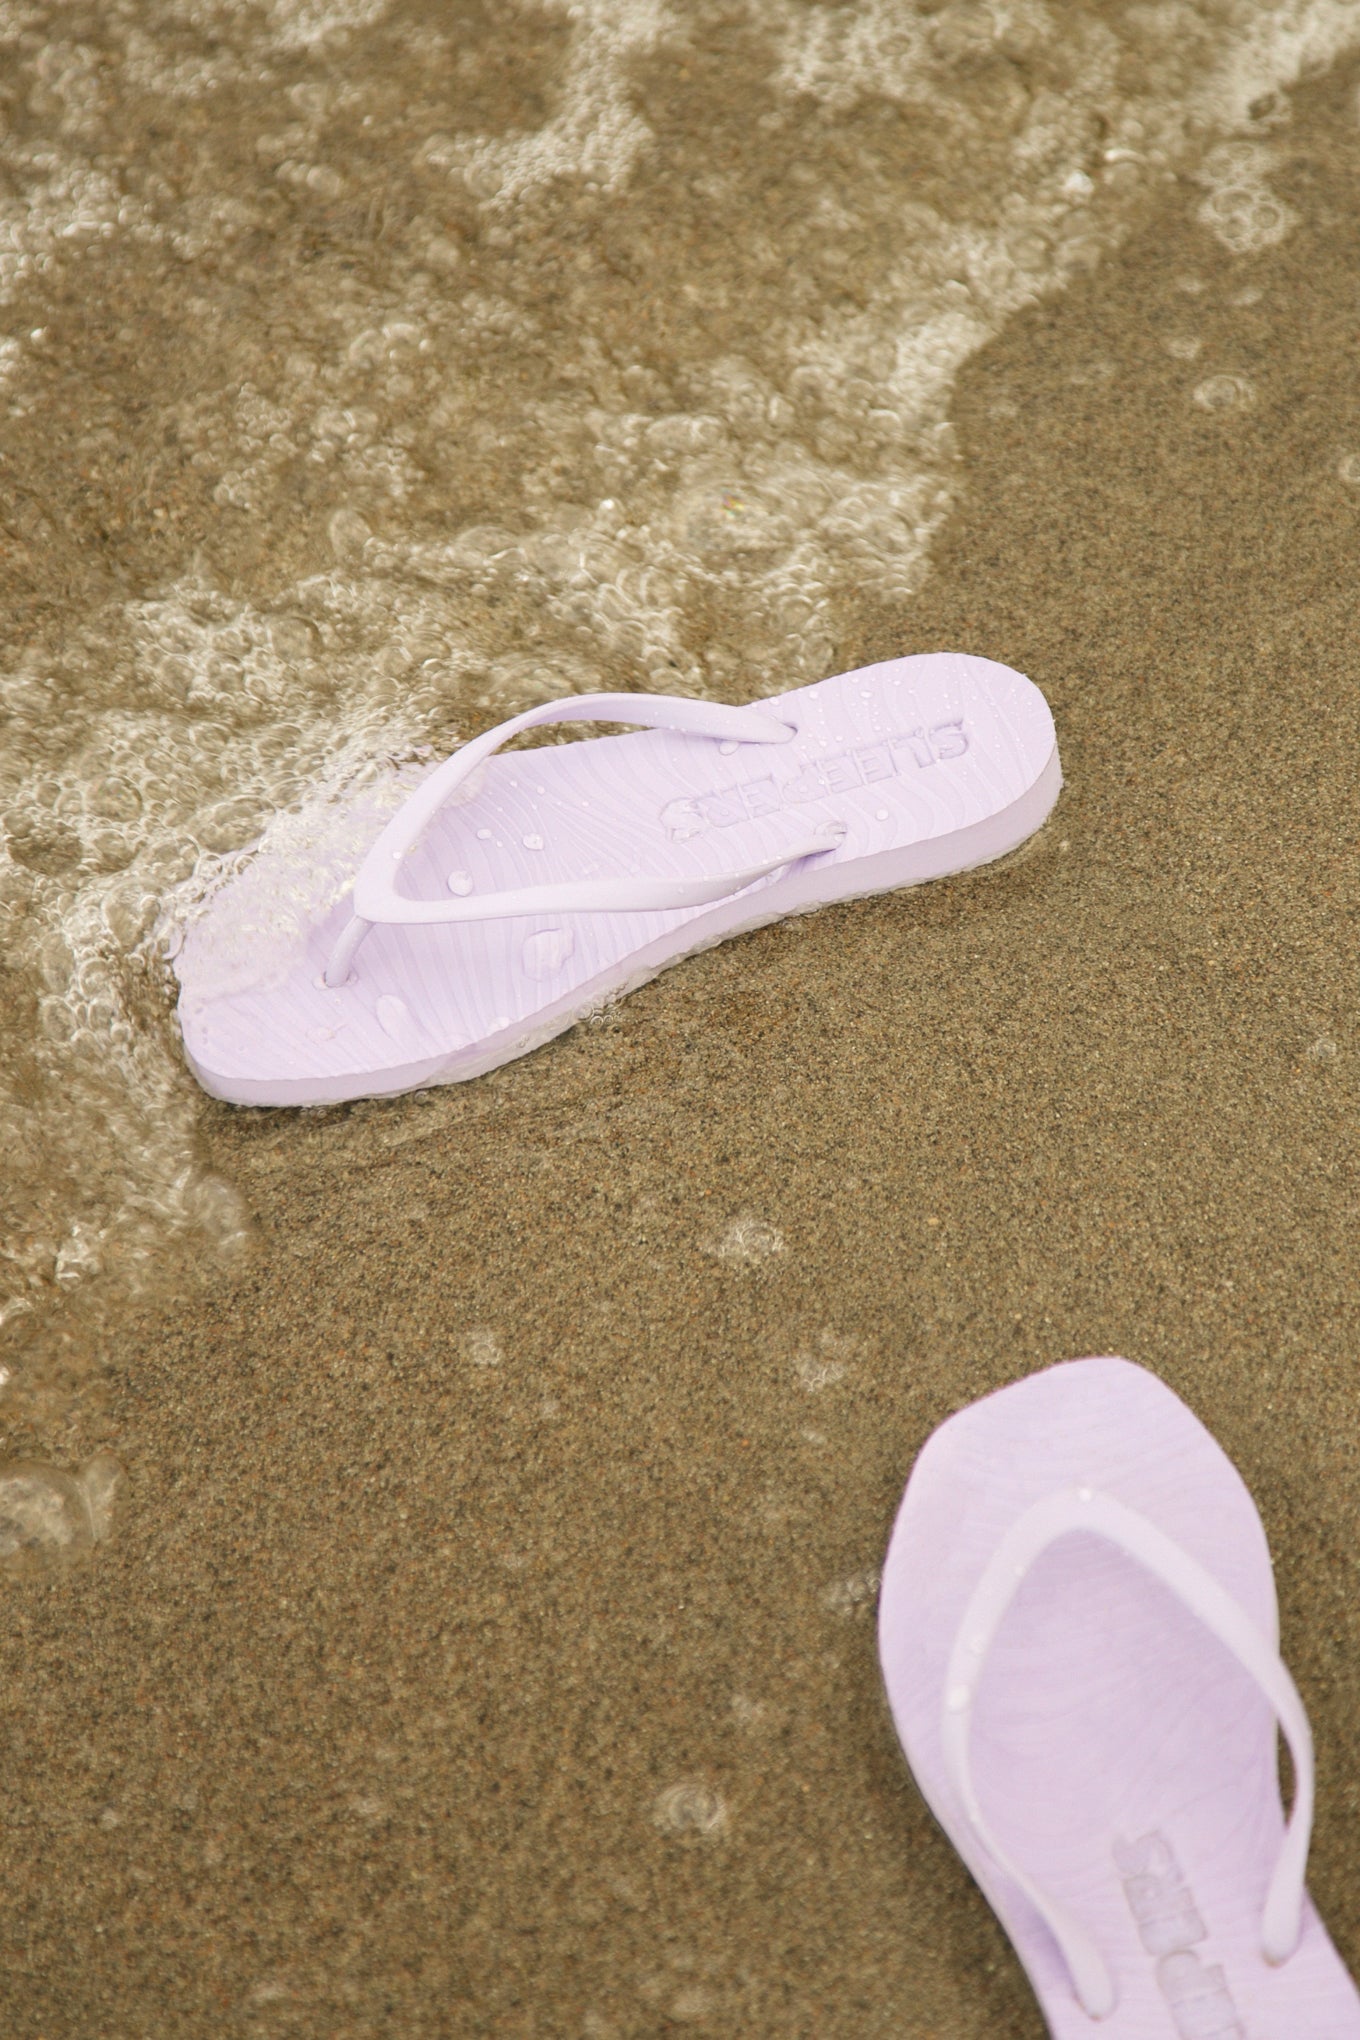 Sleepers Eco-Friendly Sandal Tapered Lavender